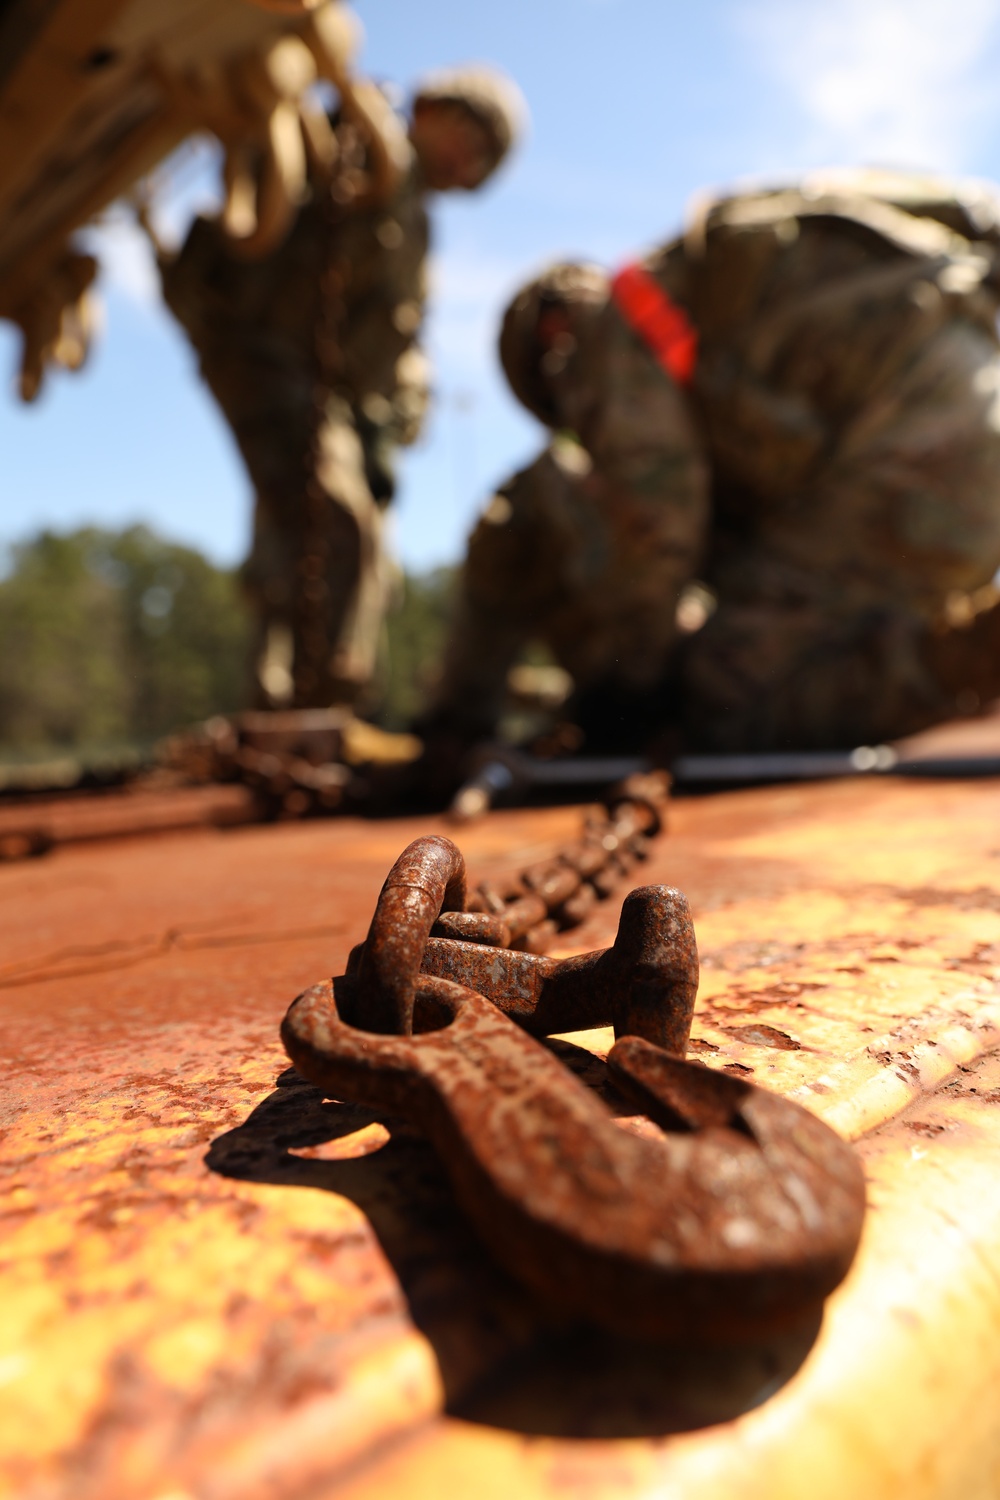 632nd Support Maintenance Company conducts deployment readiness training